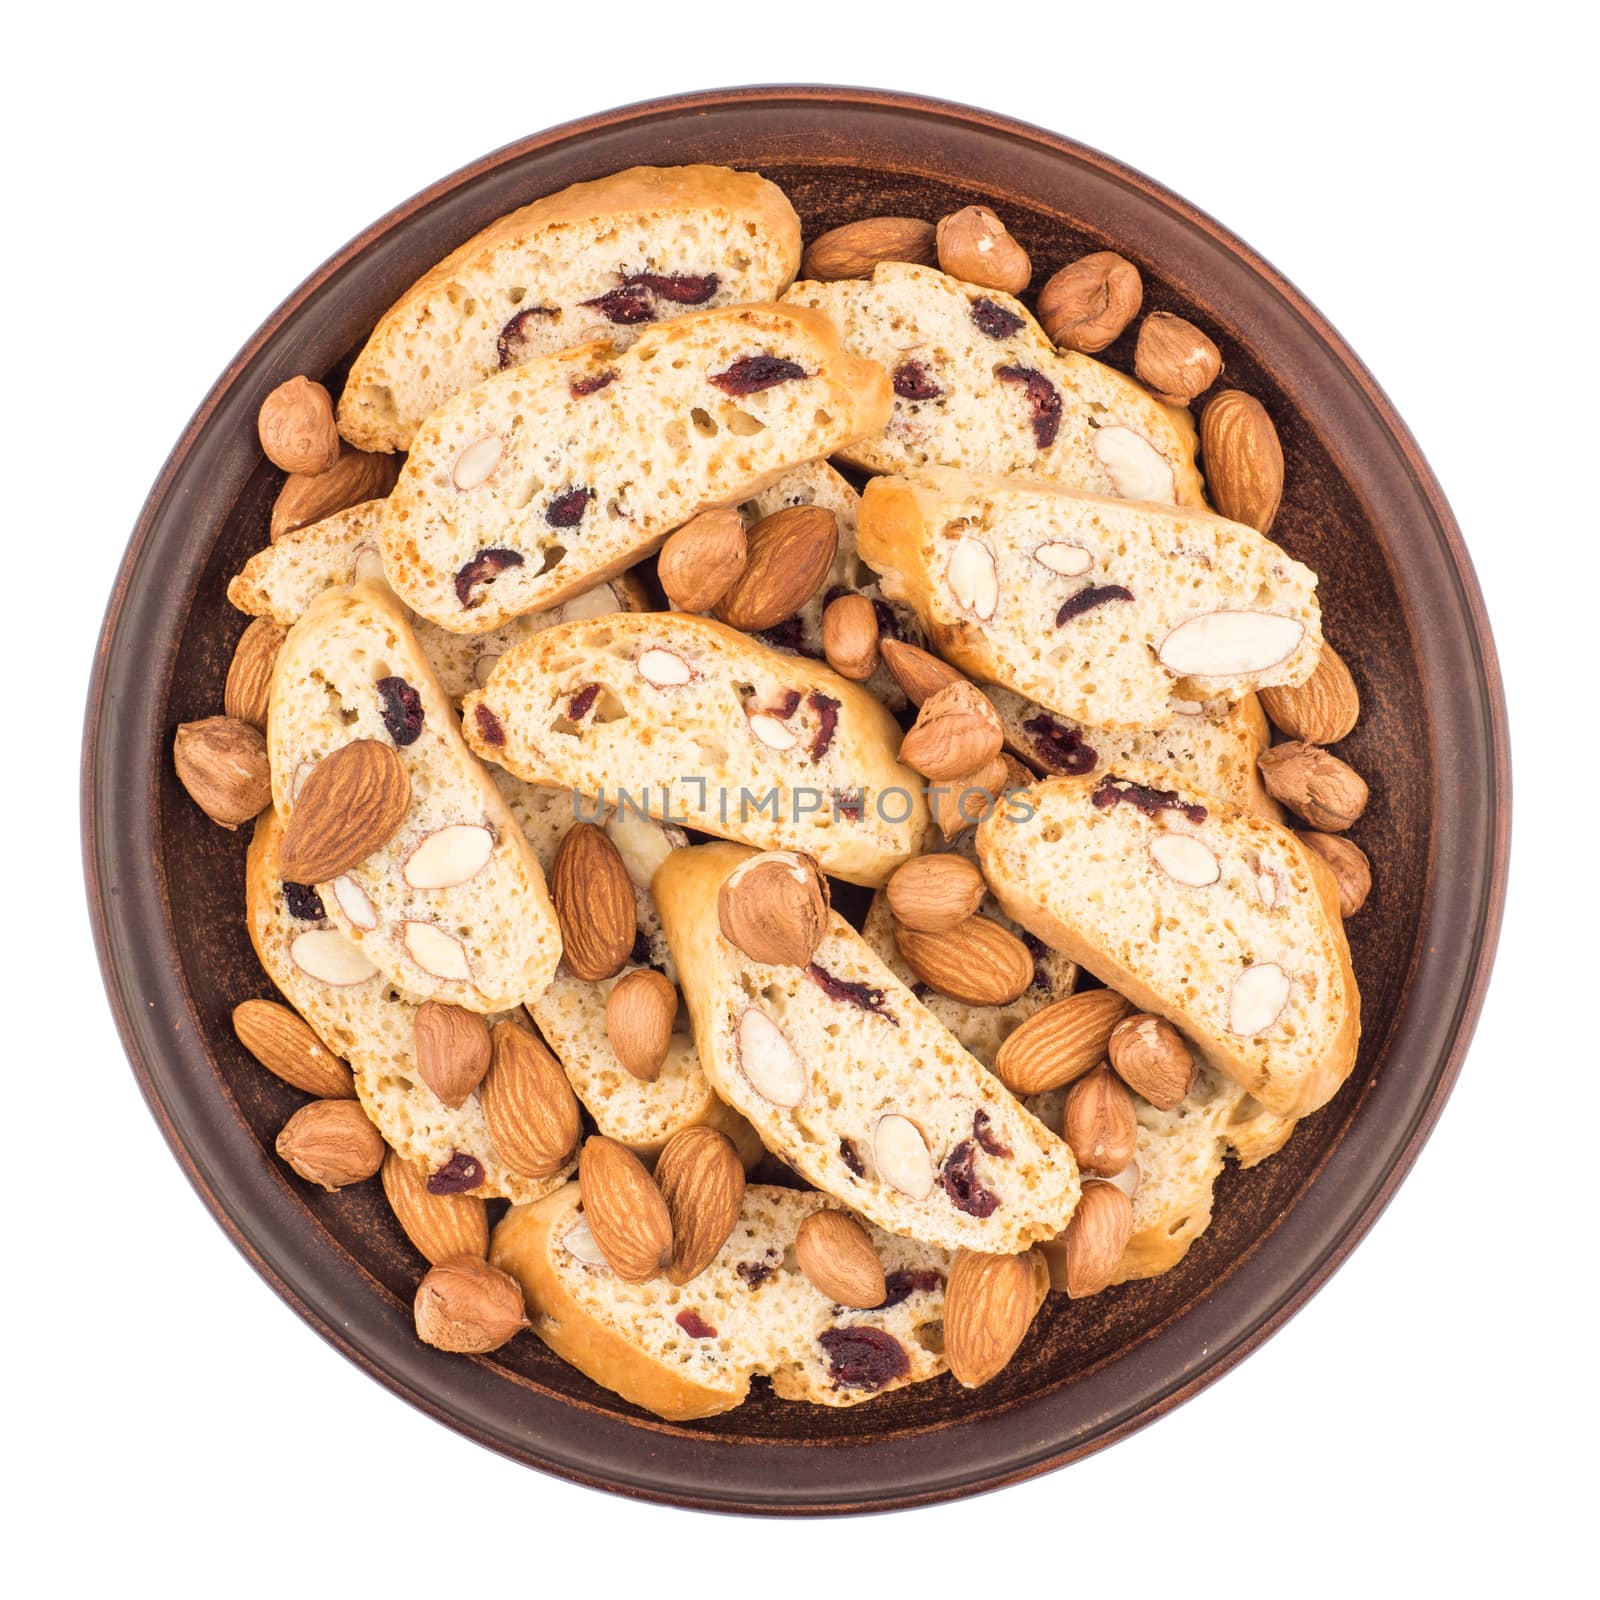 Cookies with raisins and nuts in a ceramic plate. Isolated on white background. Top view.